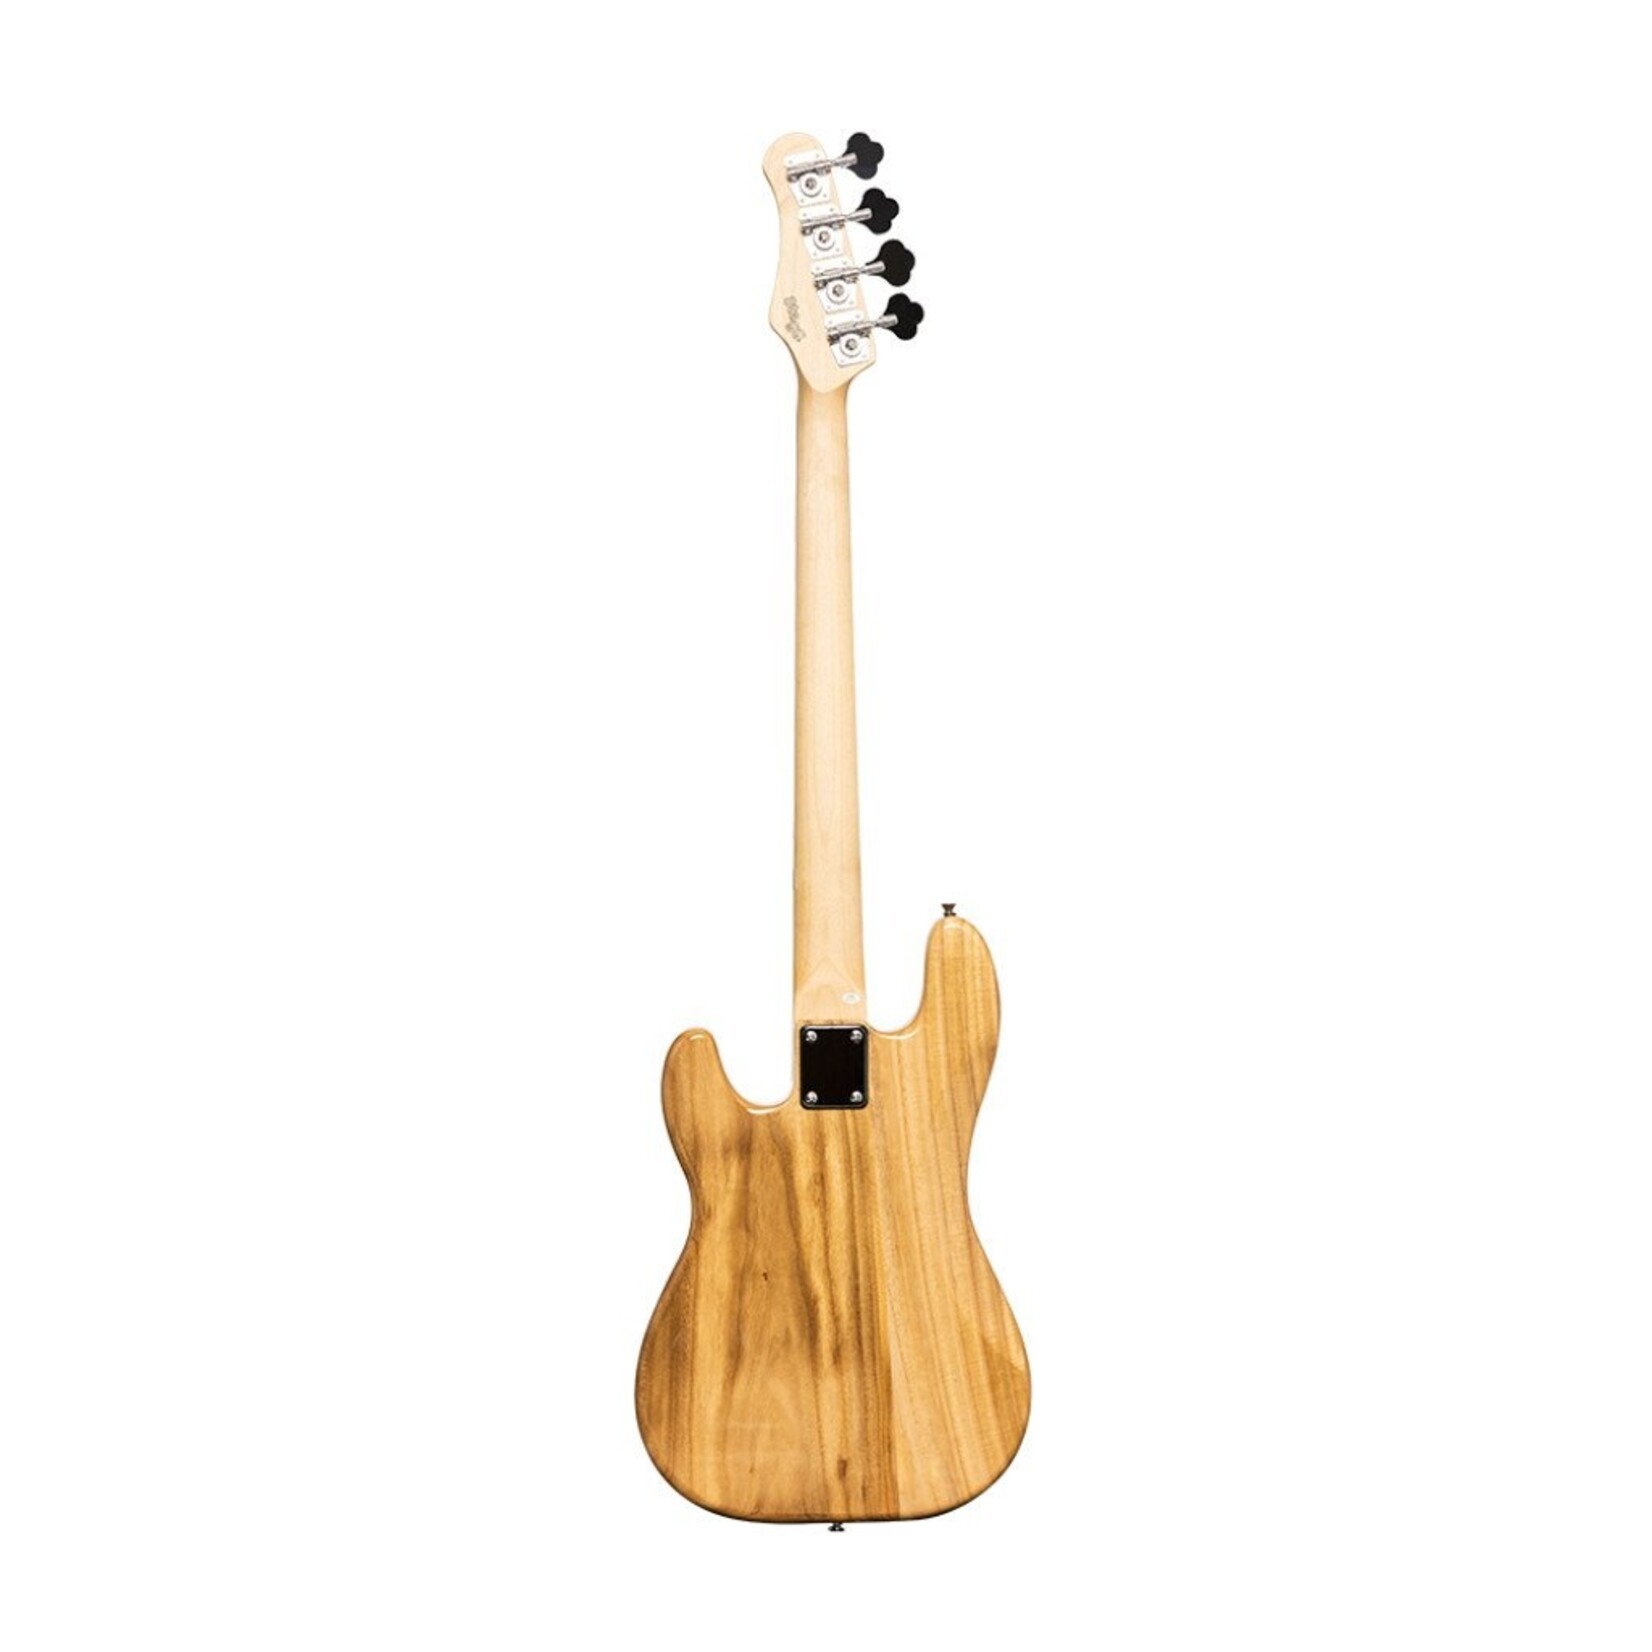 Stagg SBP-30 Standard "P" 4-String Electric Bass Guitar - Natural